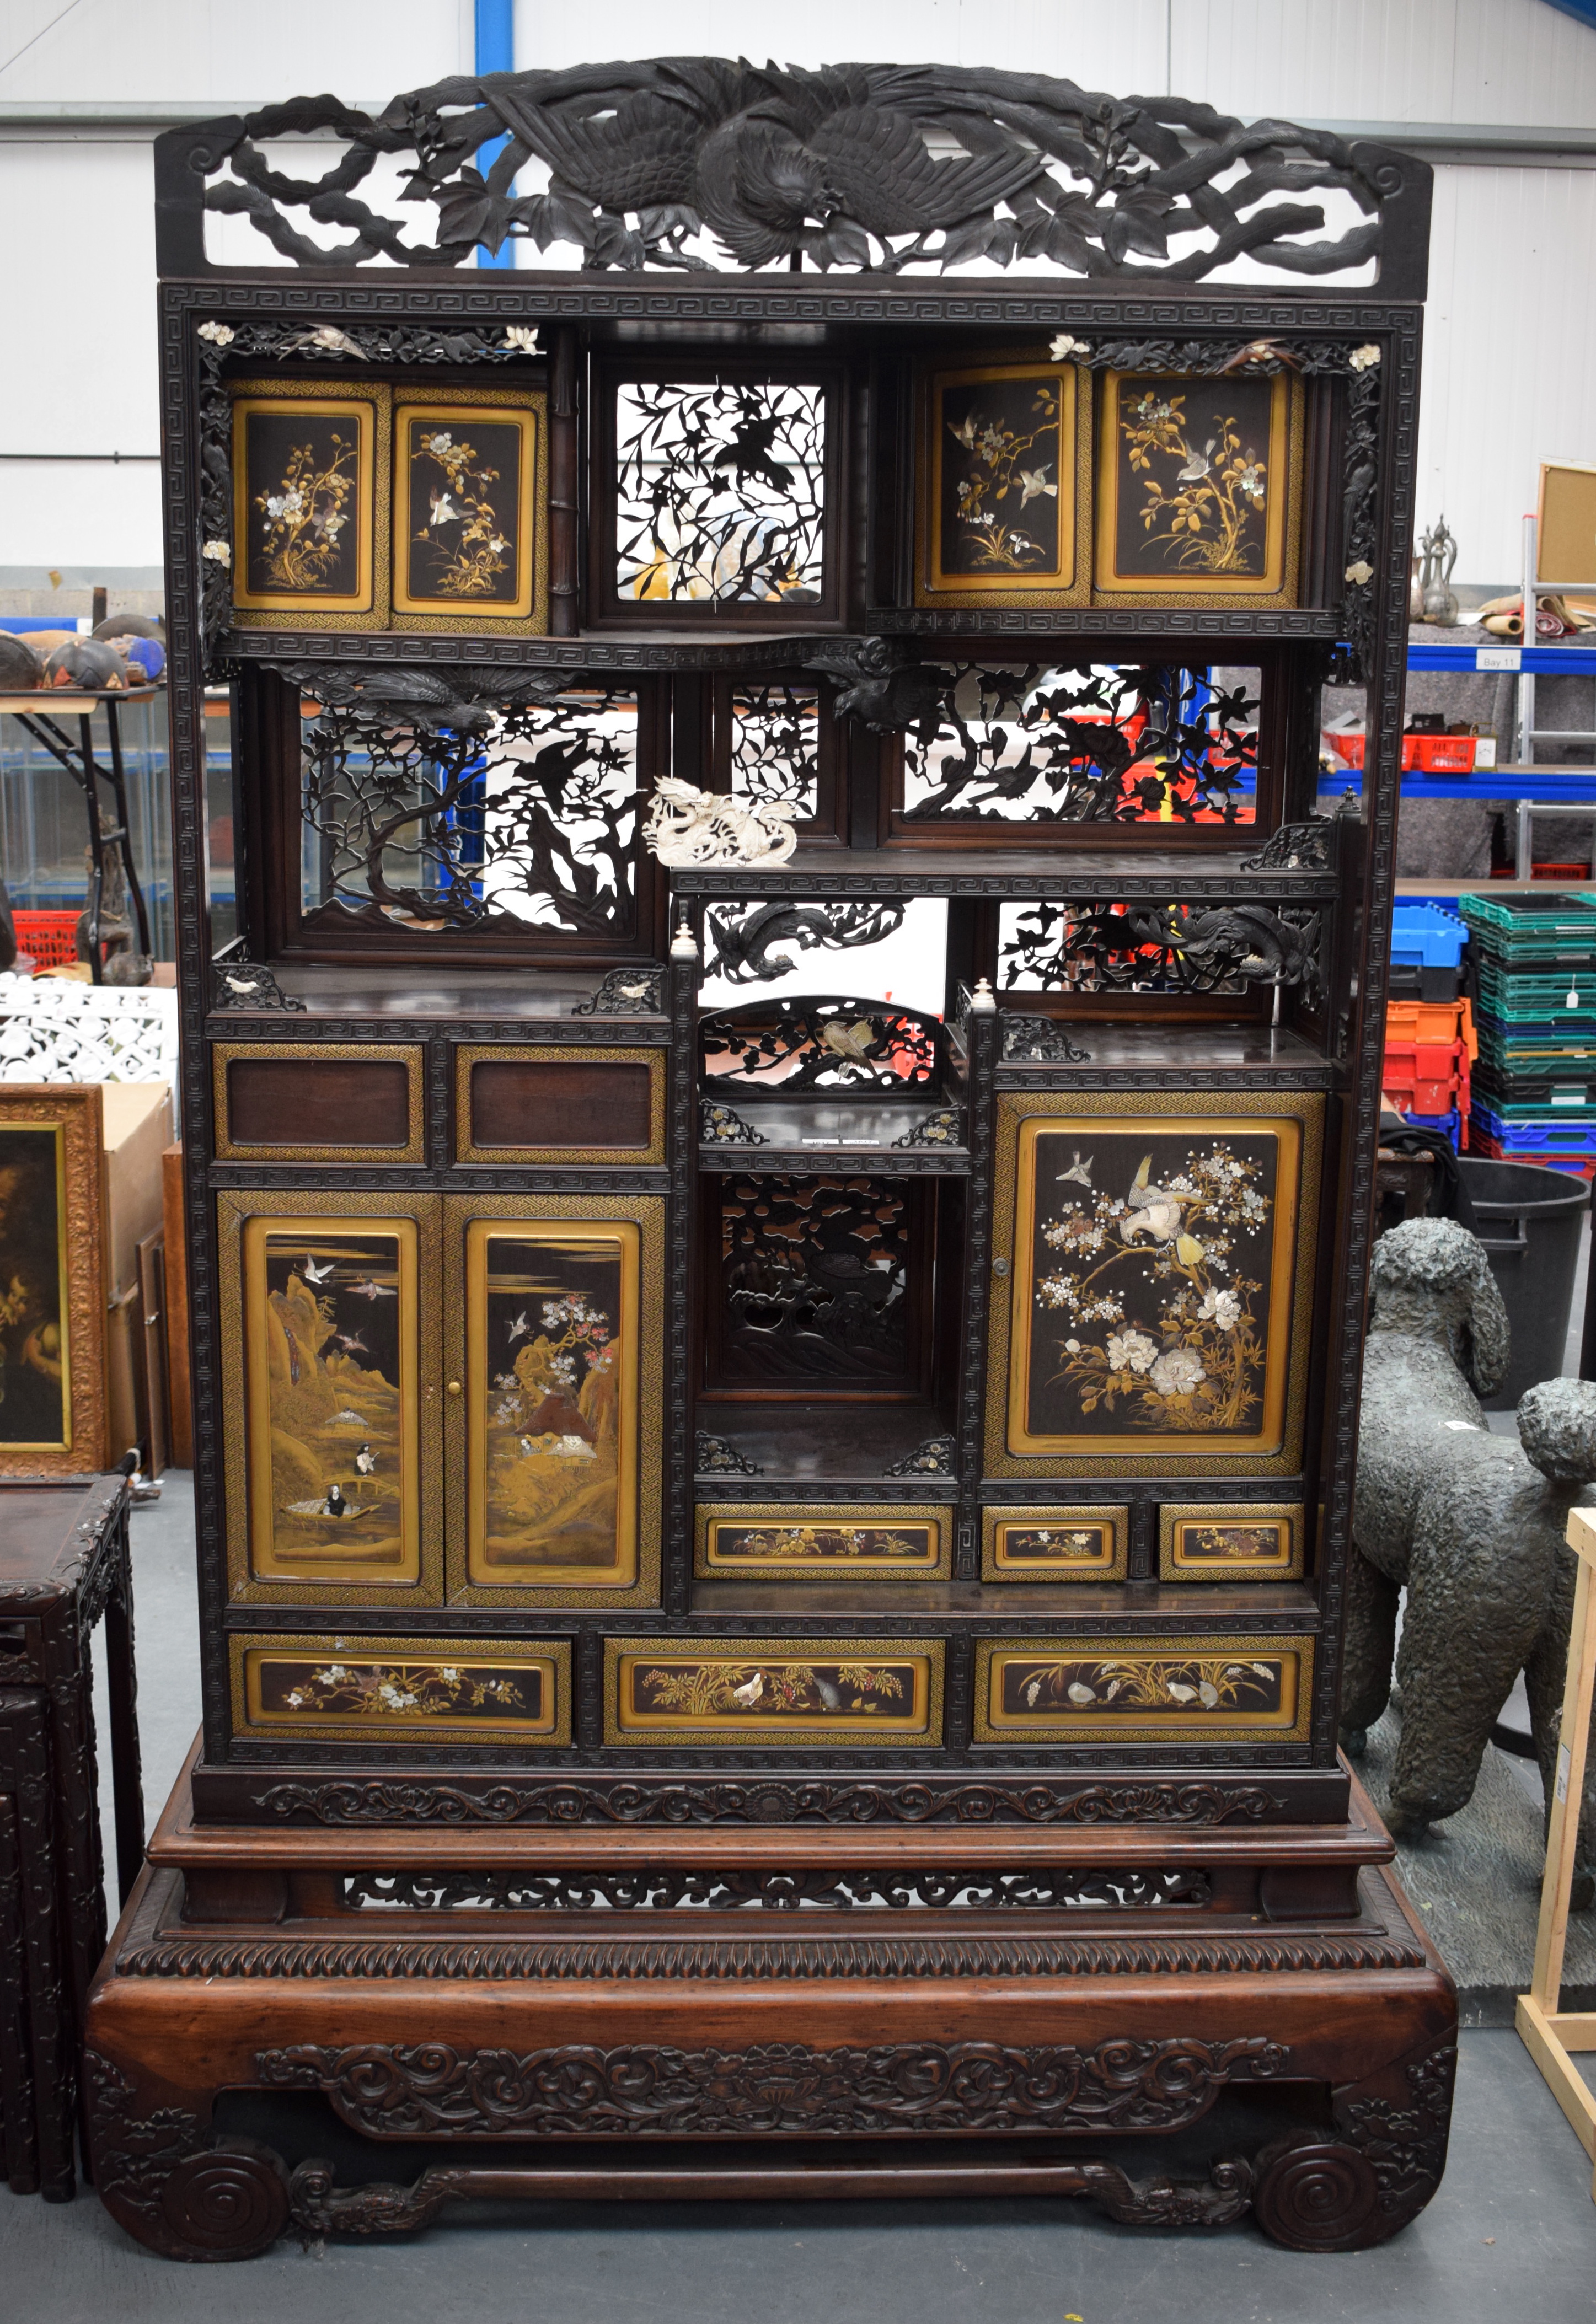 A VERY LARGE 19TH CENTURY JAPANESE MEIJI PERIOD SHIBAYAMA LACQUER AND IVORY DISPLAY CABINET decorate